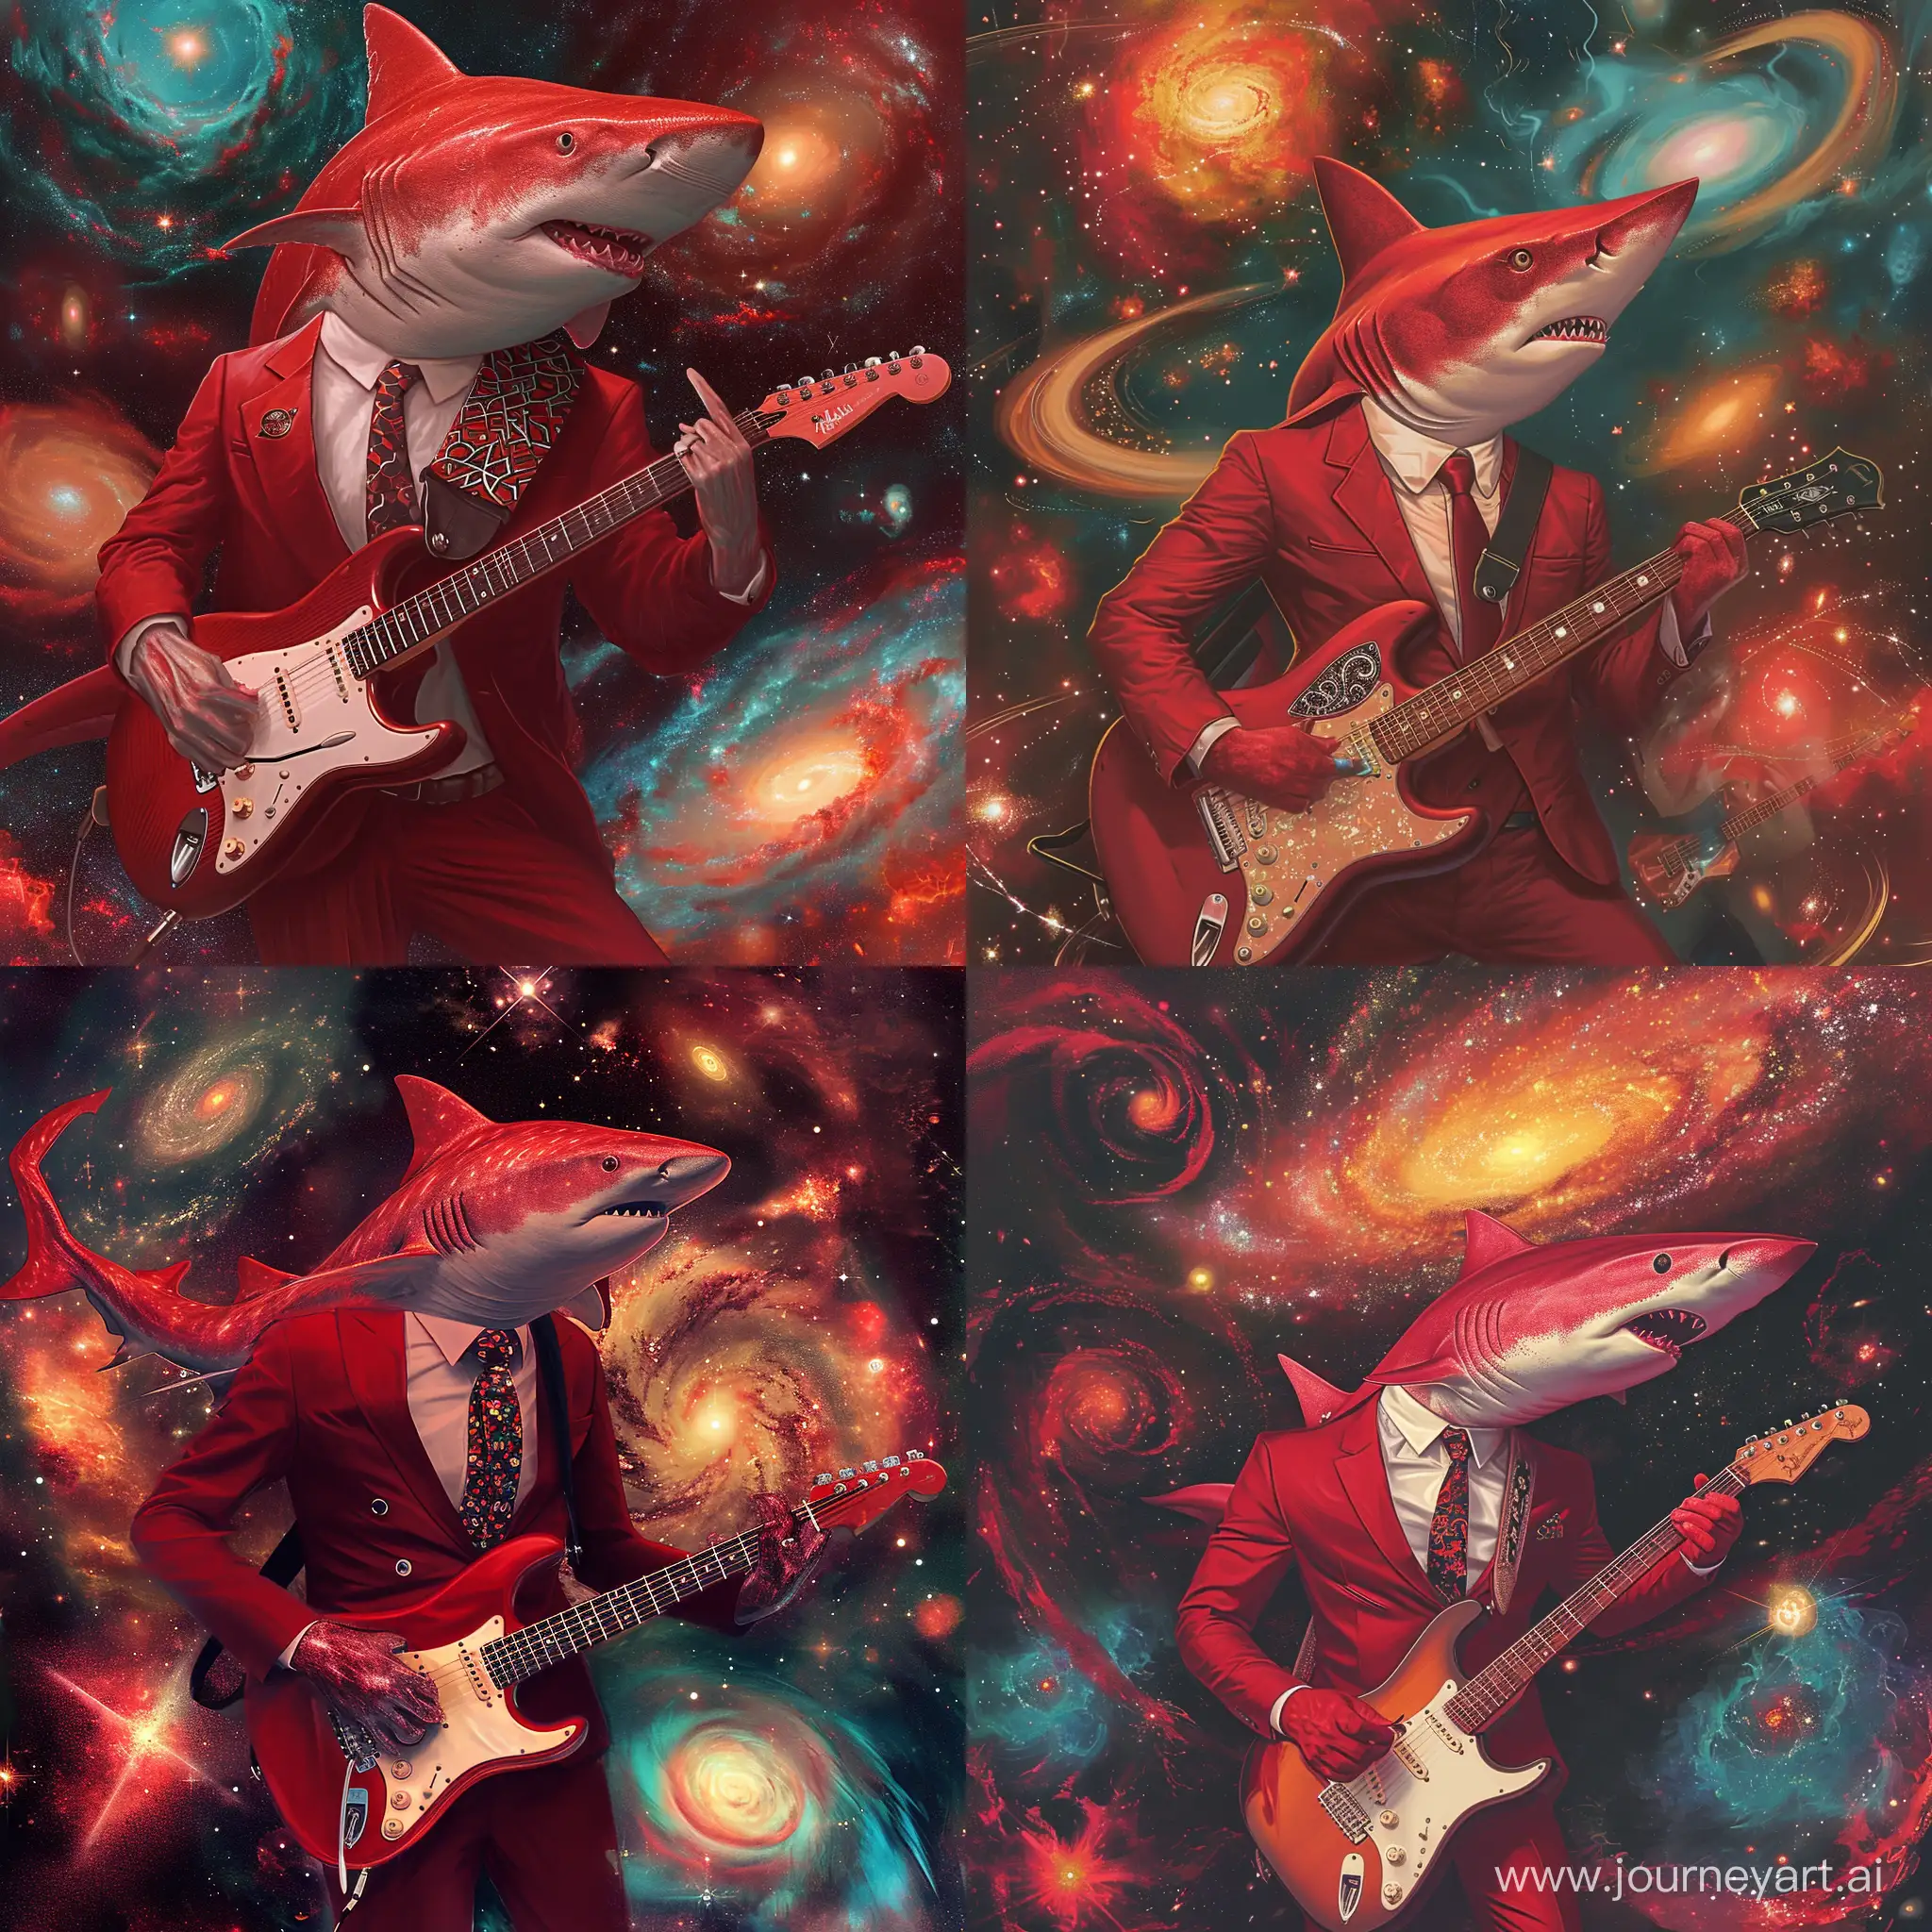 Professional-Red-Shark-Playing-Electric-Guitar-in-Cosmic-Ambiance